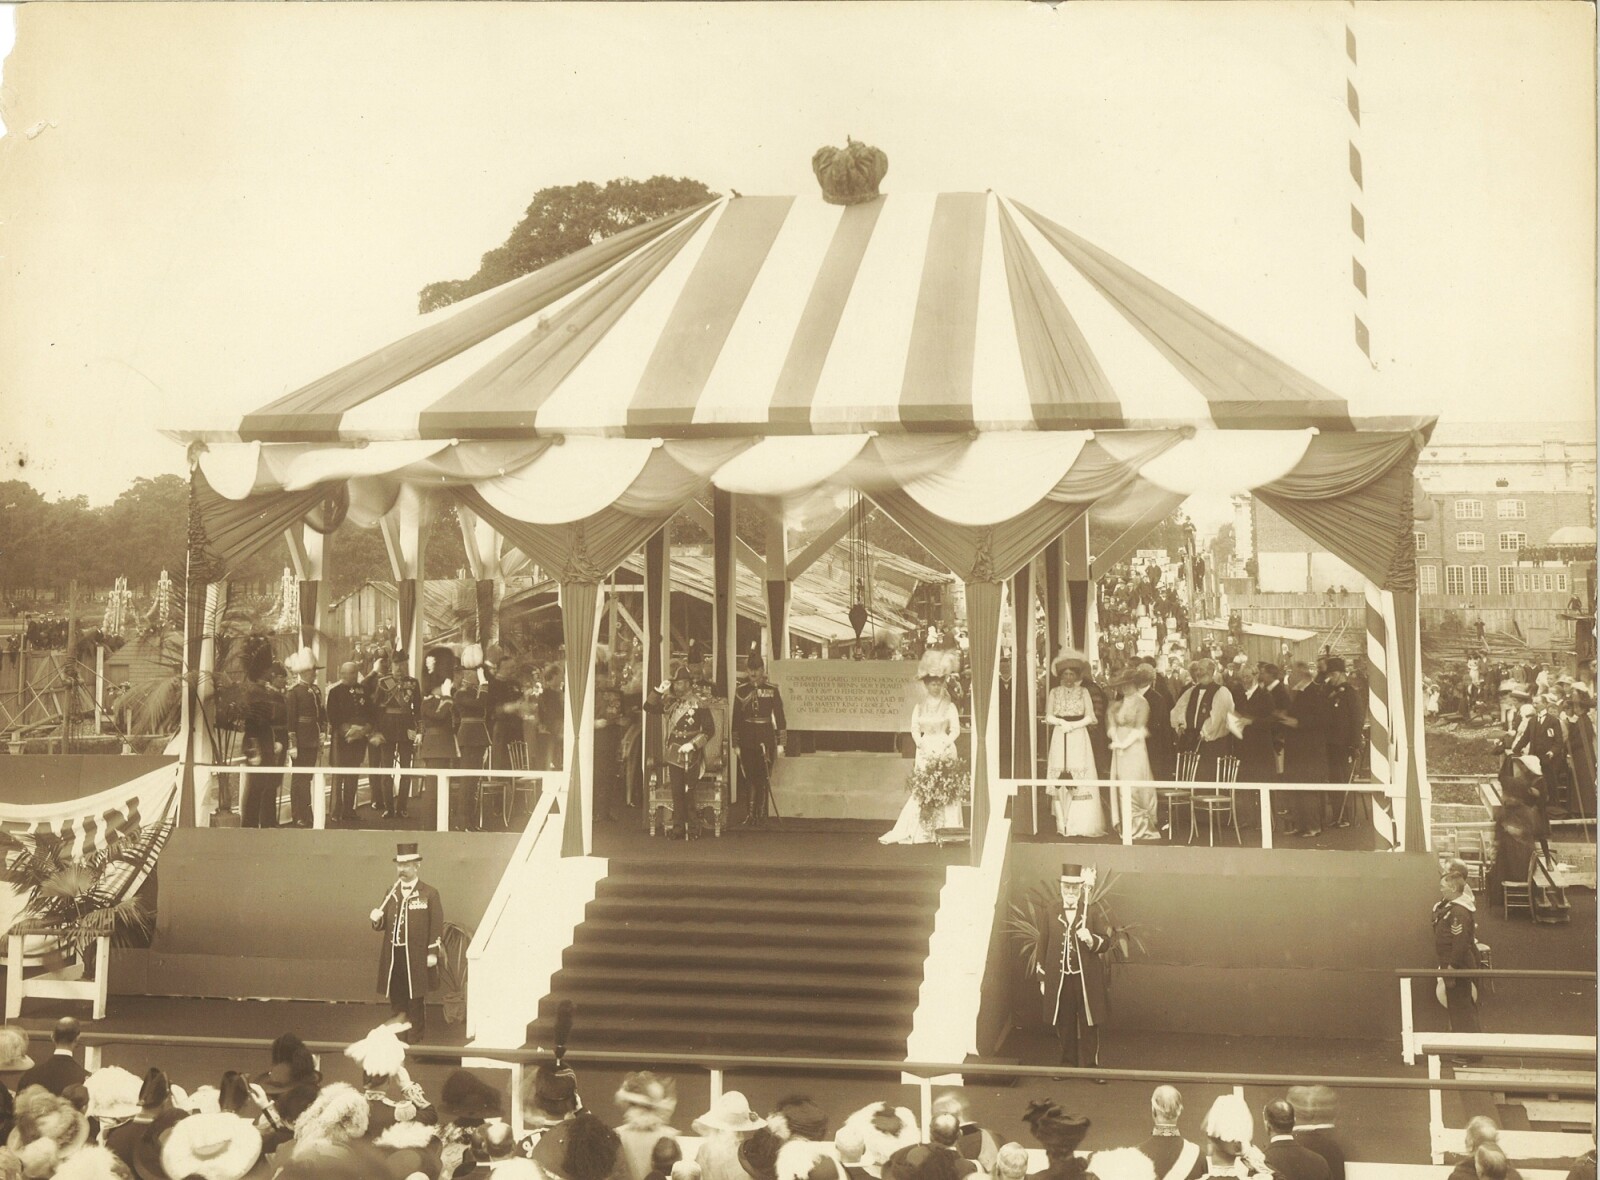 Sepia-toned photograph of King George V and Queen Mary standing under a striped canopy at the ceremony to lay the Foundation Stone. The ladies are in long pale dresses with large hats and the men are in ceremonial military dress